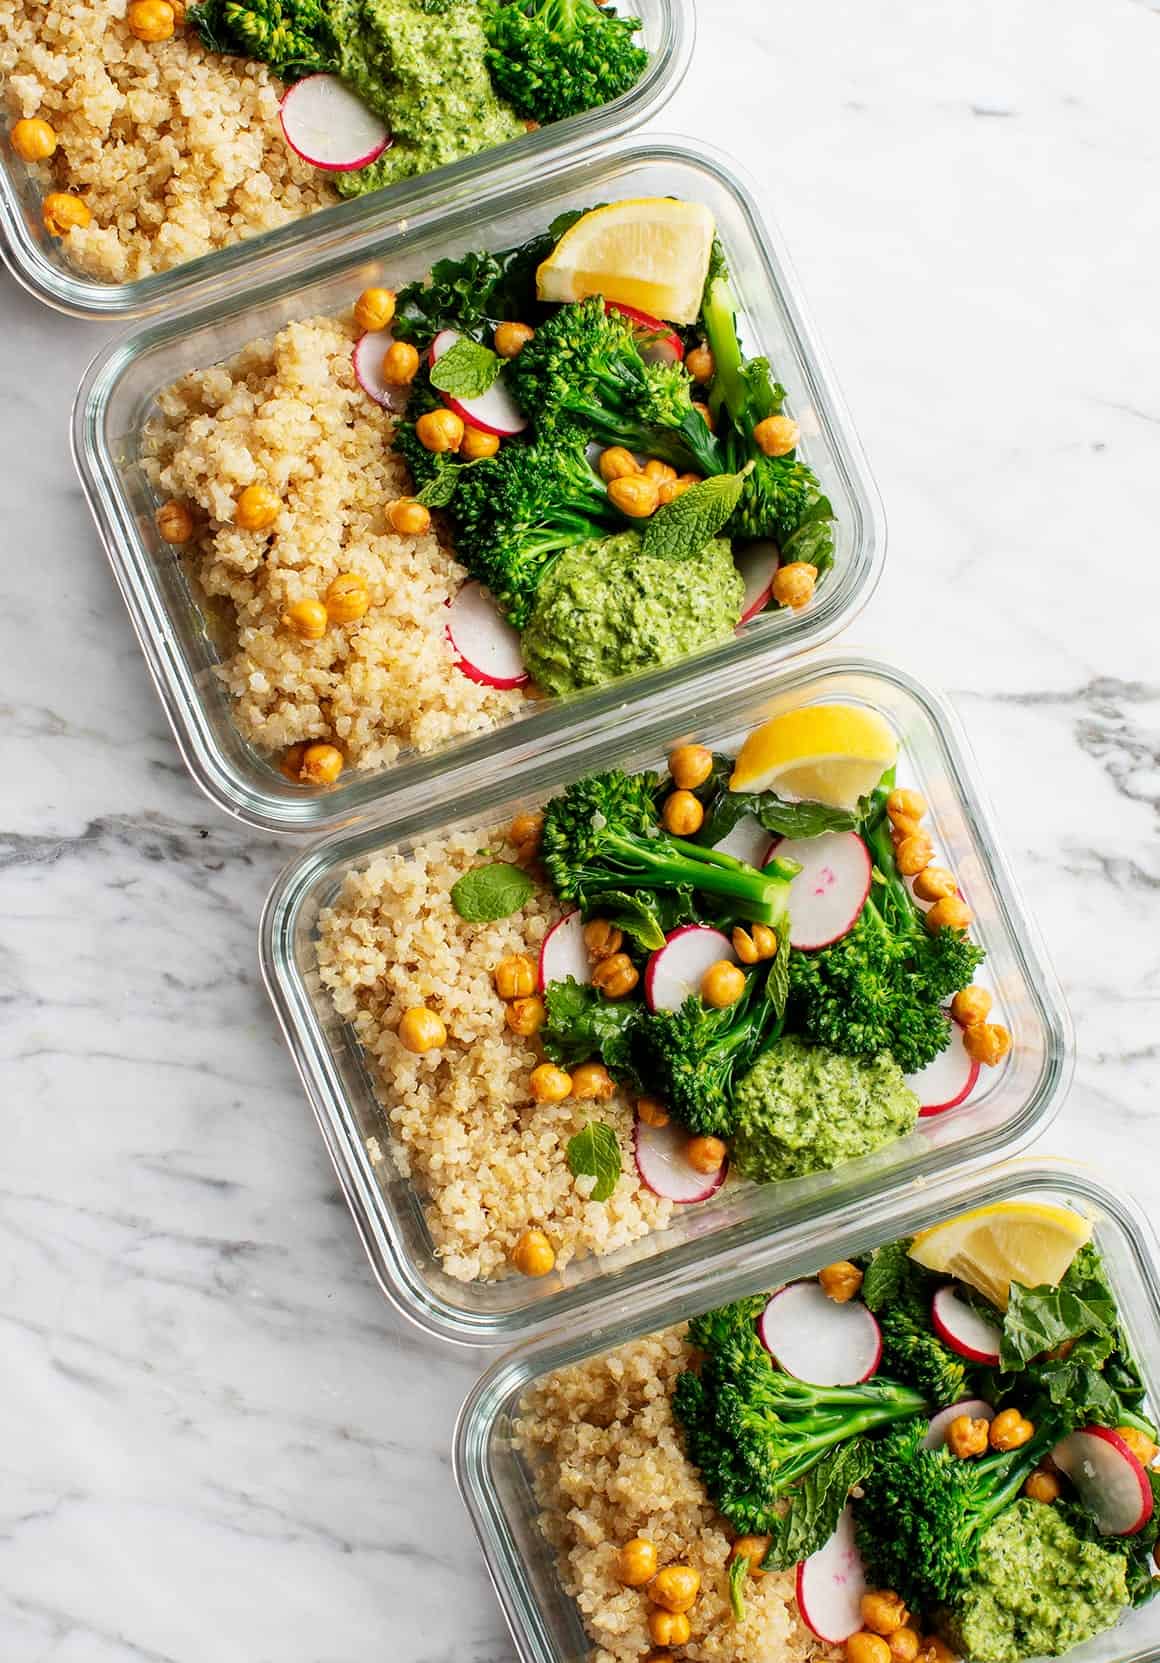 Healthy Lunch Meal Prep Ideas